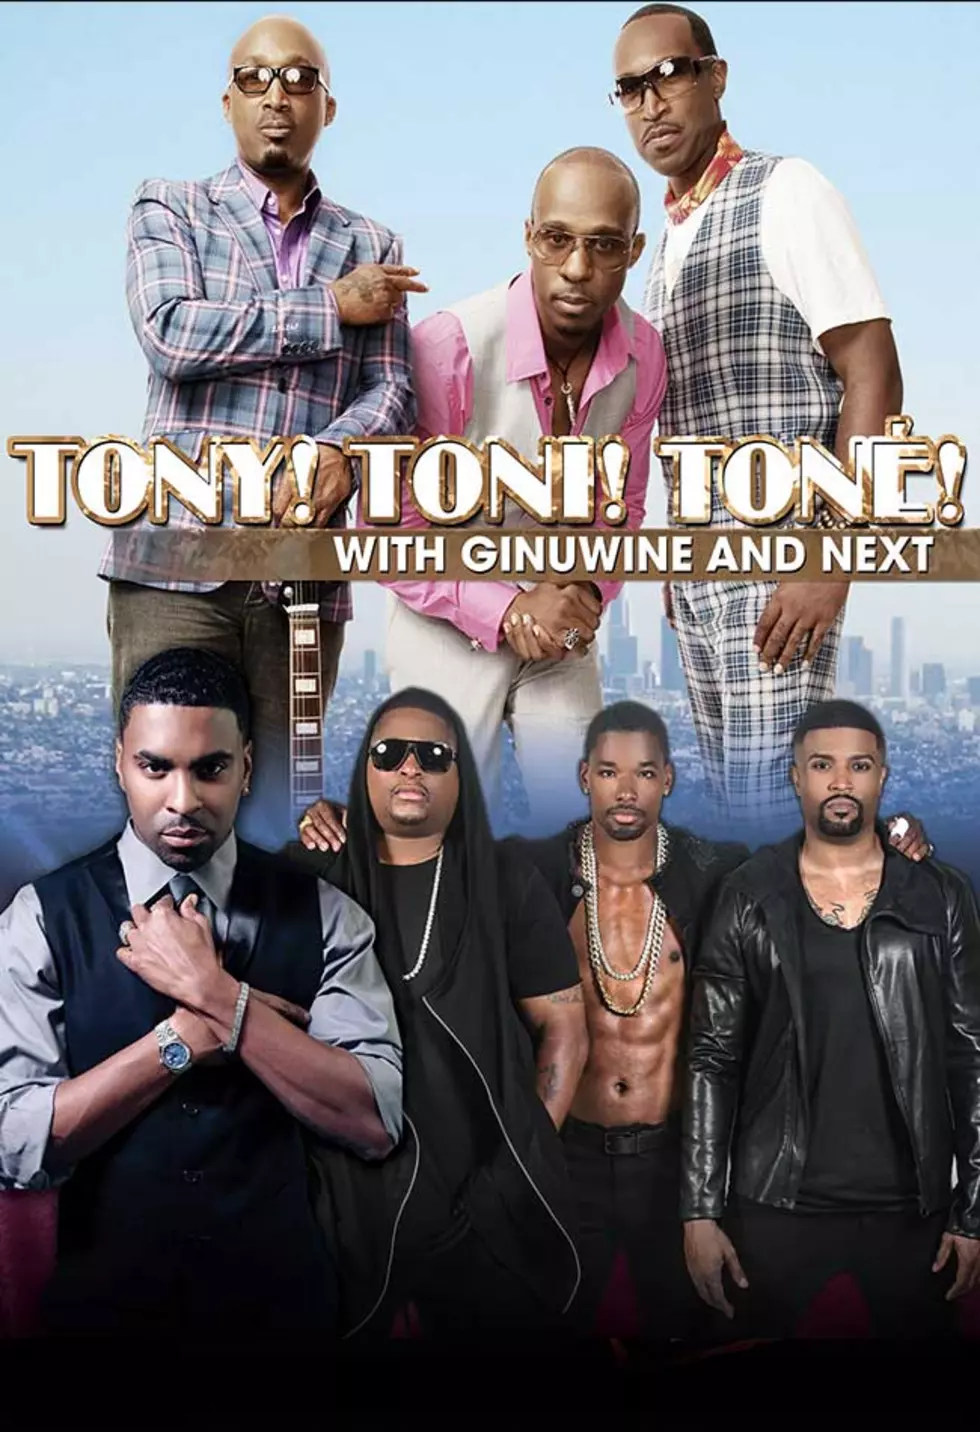 Yasmin Young has your tickets to see Tony, Toni, Tone&#8217; March 18th at Soaring Eagle